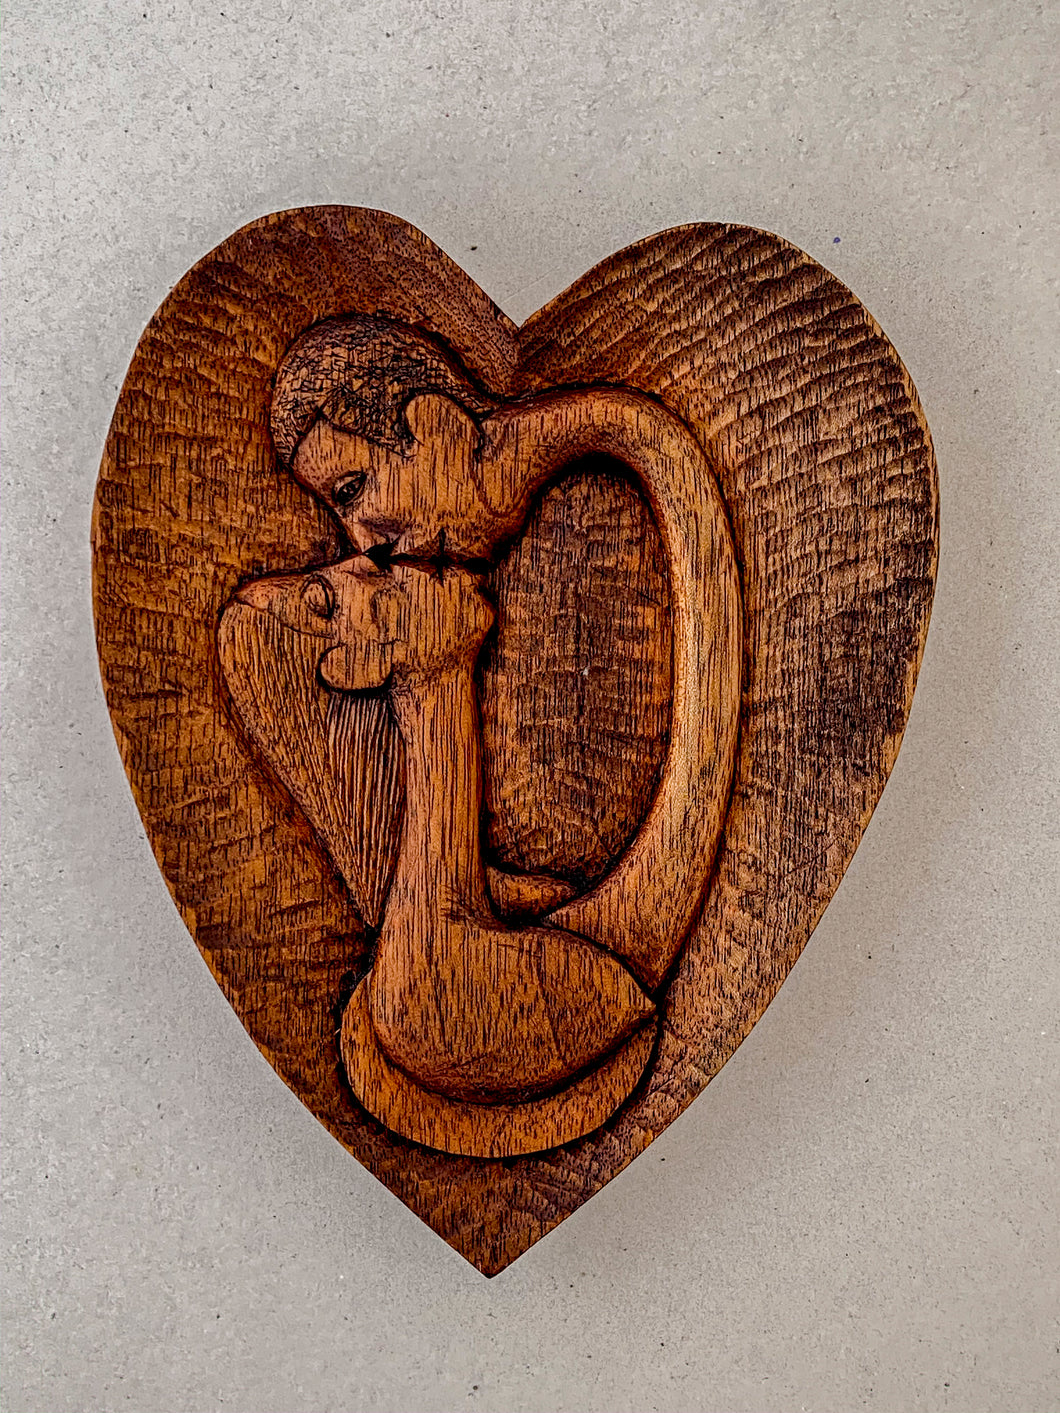 Heart Wood Carving